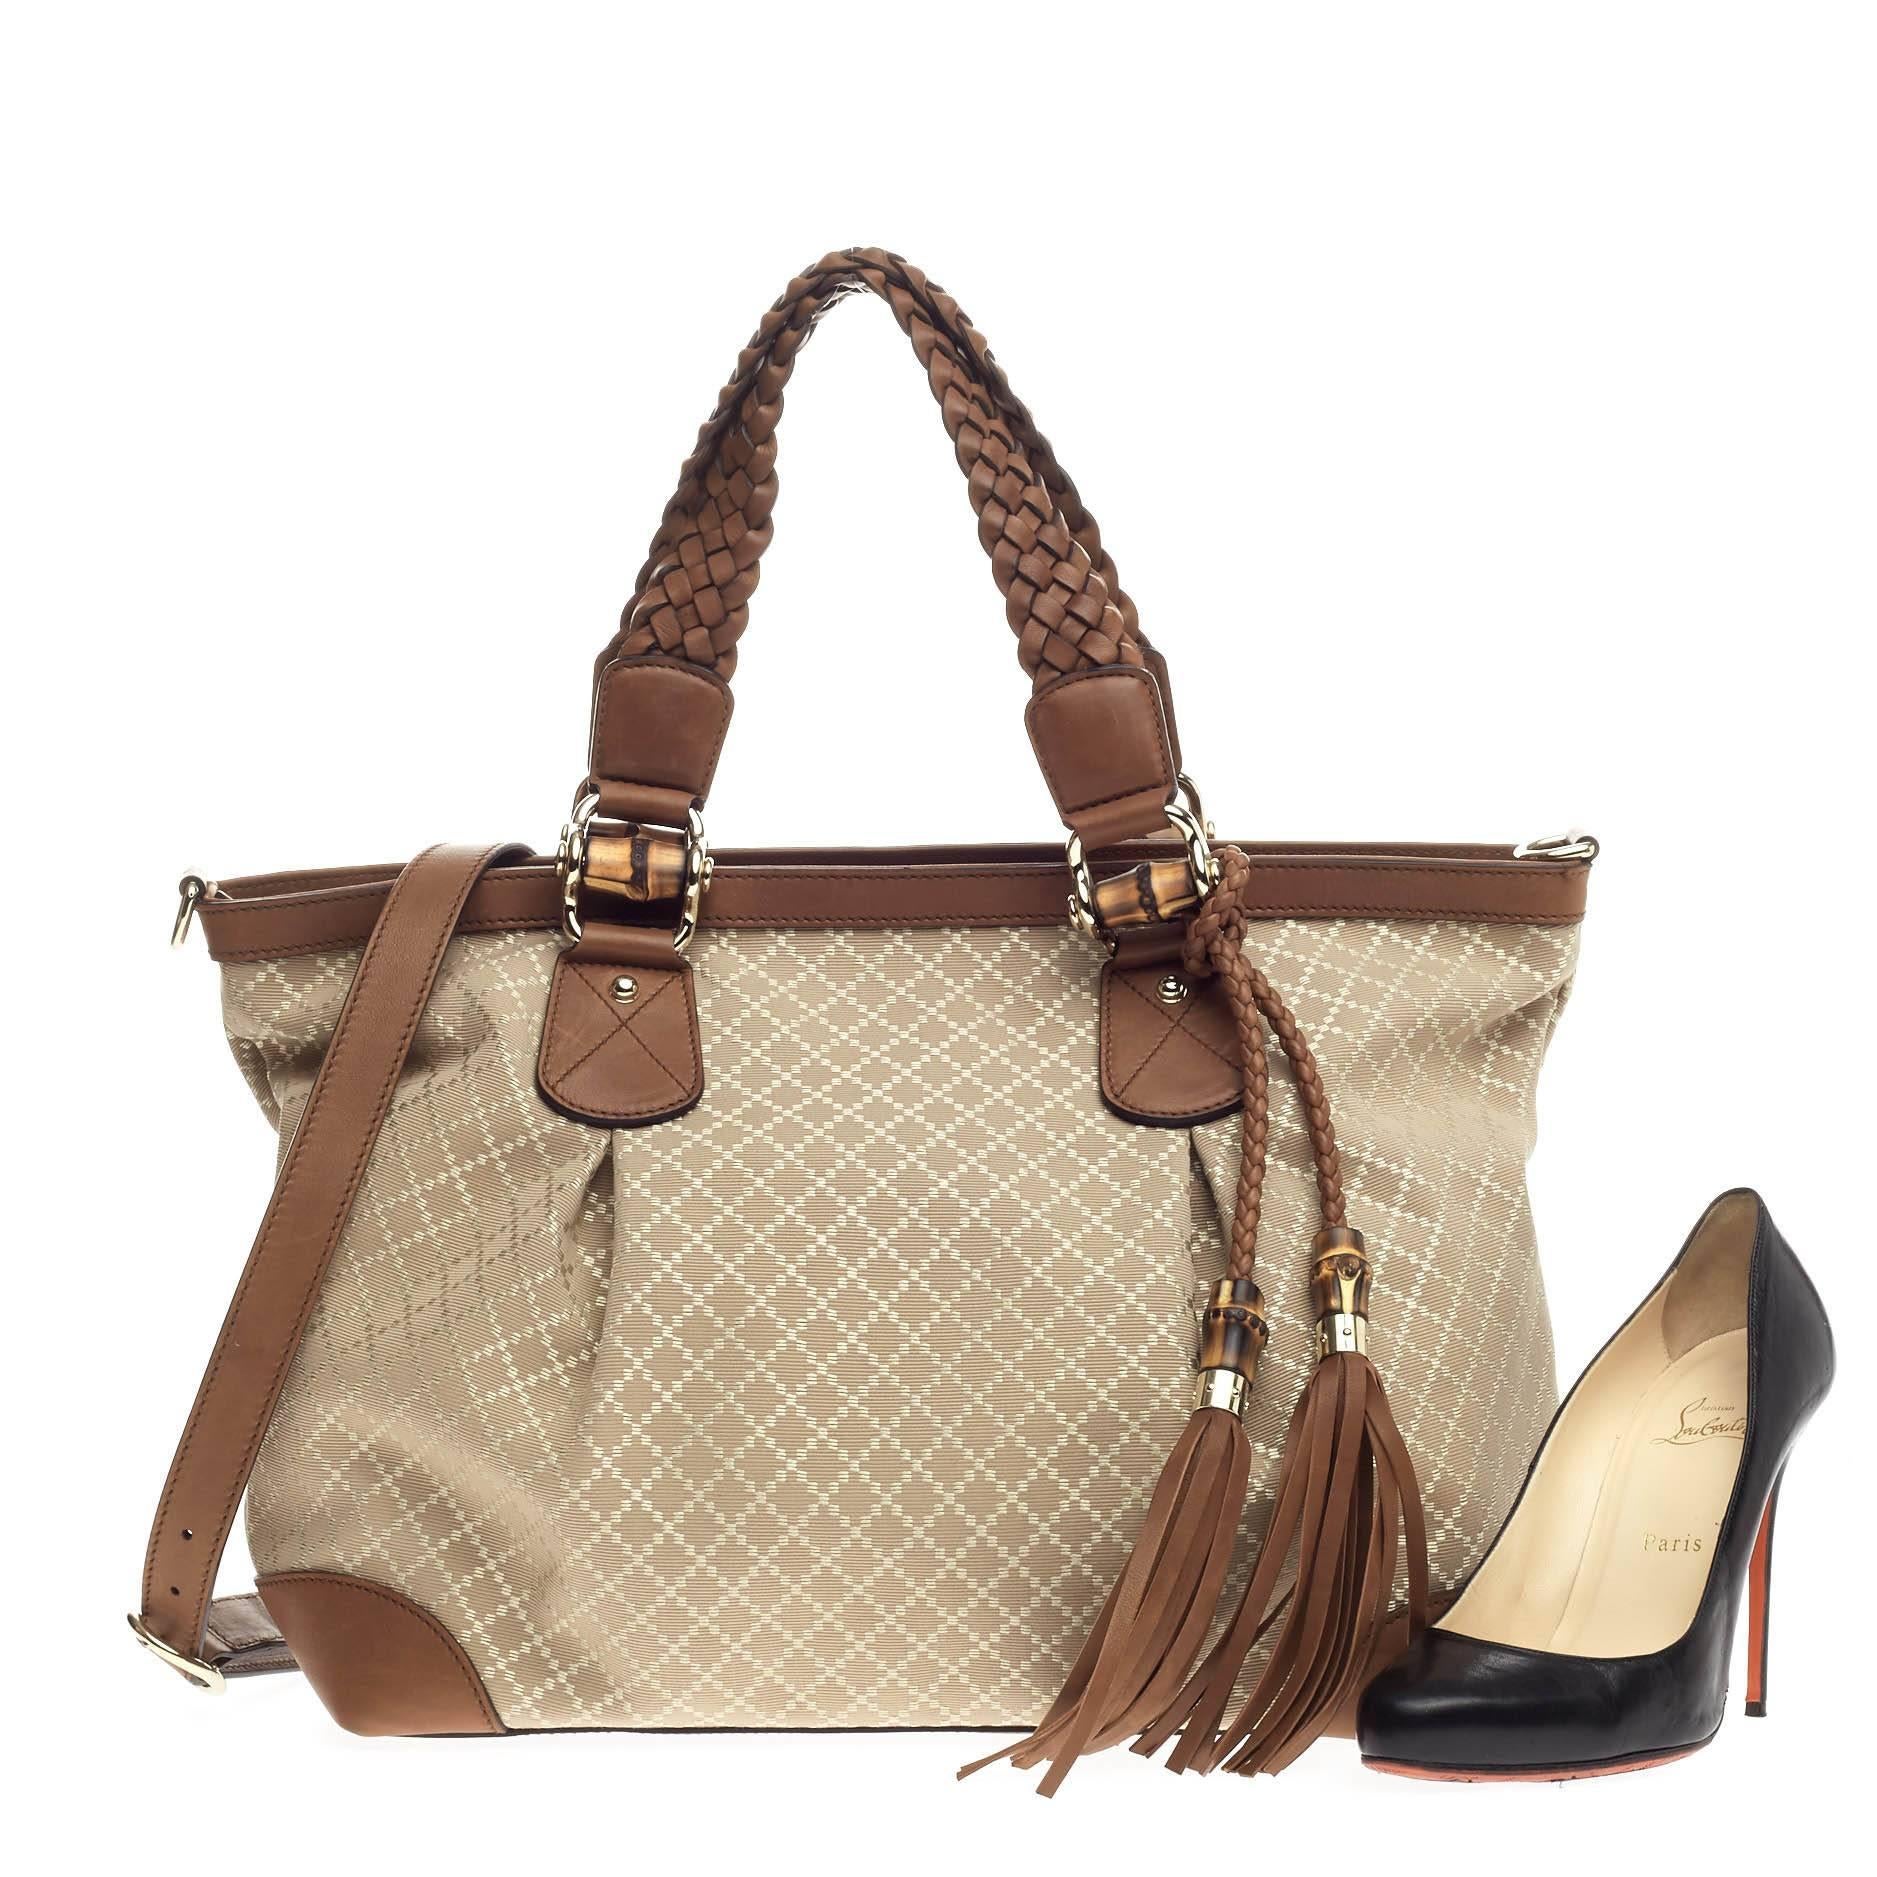 This authentic Gucci Eva Tote Diamante Canvas Large is modern and sophisticated in design. Crafted in beige diamante canvas with brown leather trims, this elegant tote features dual braided handles with bamboo and leather tassel details, protective